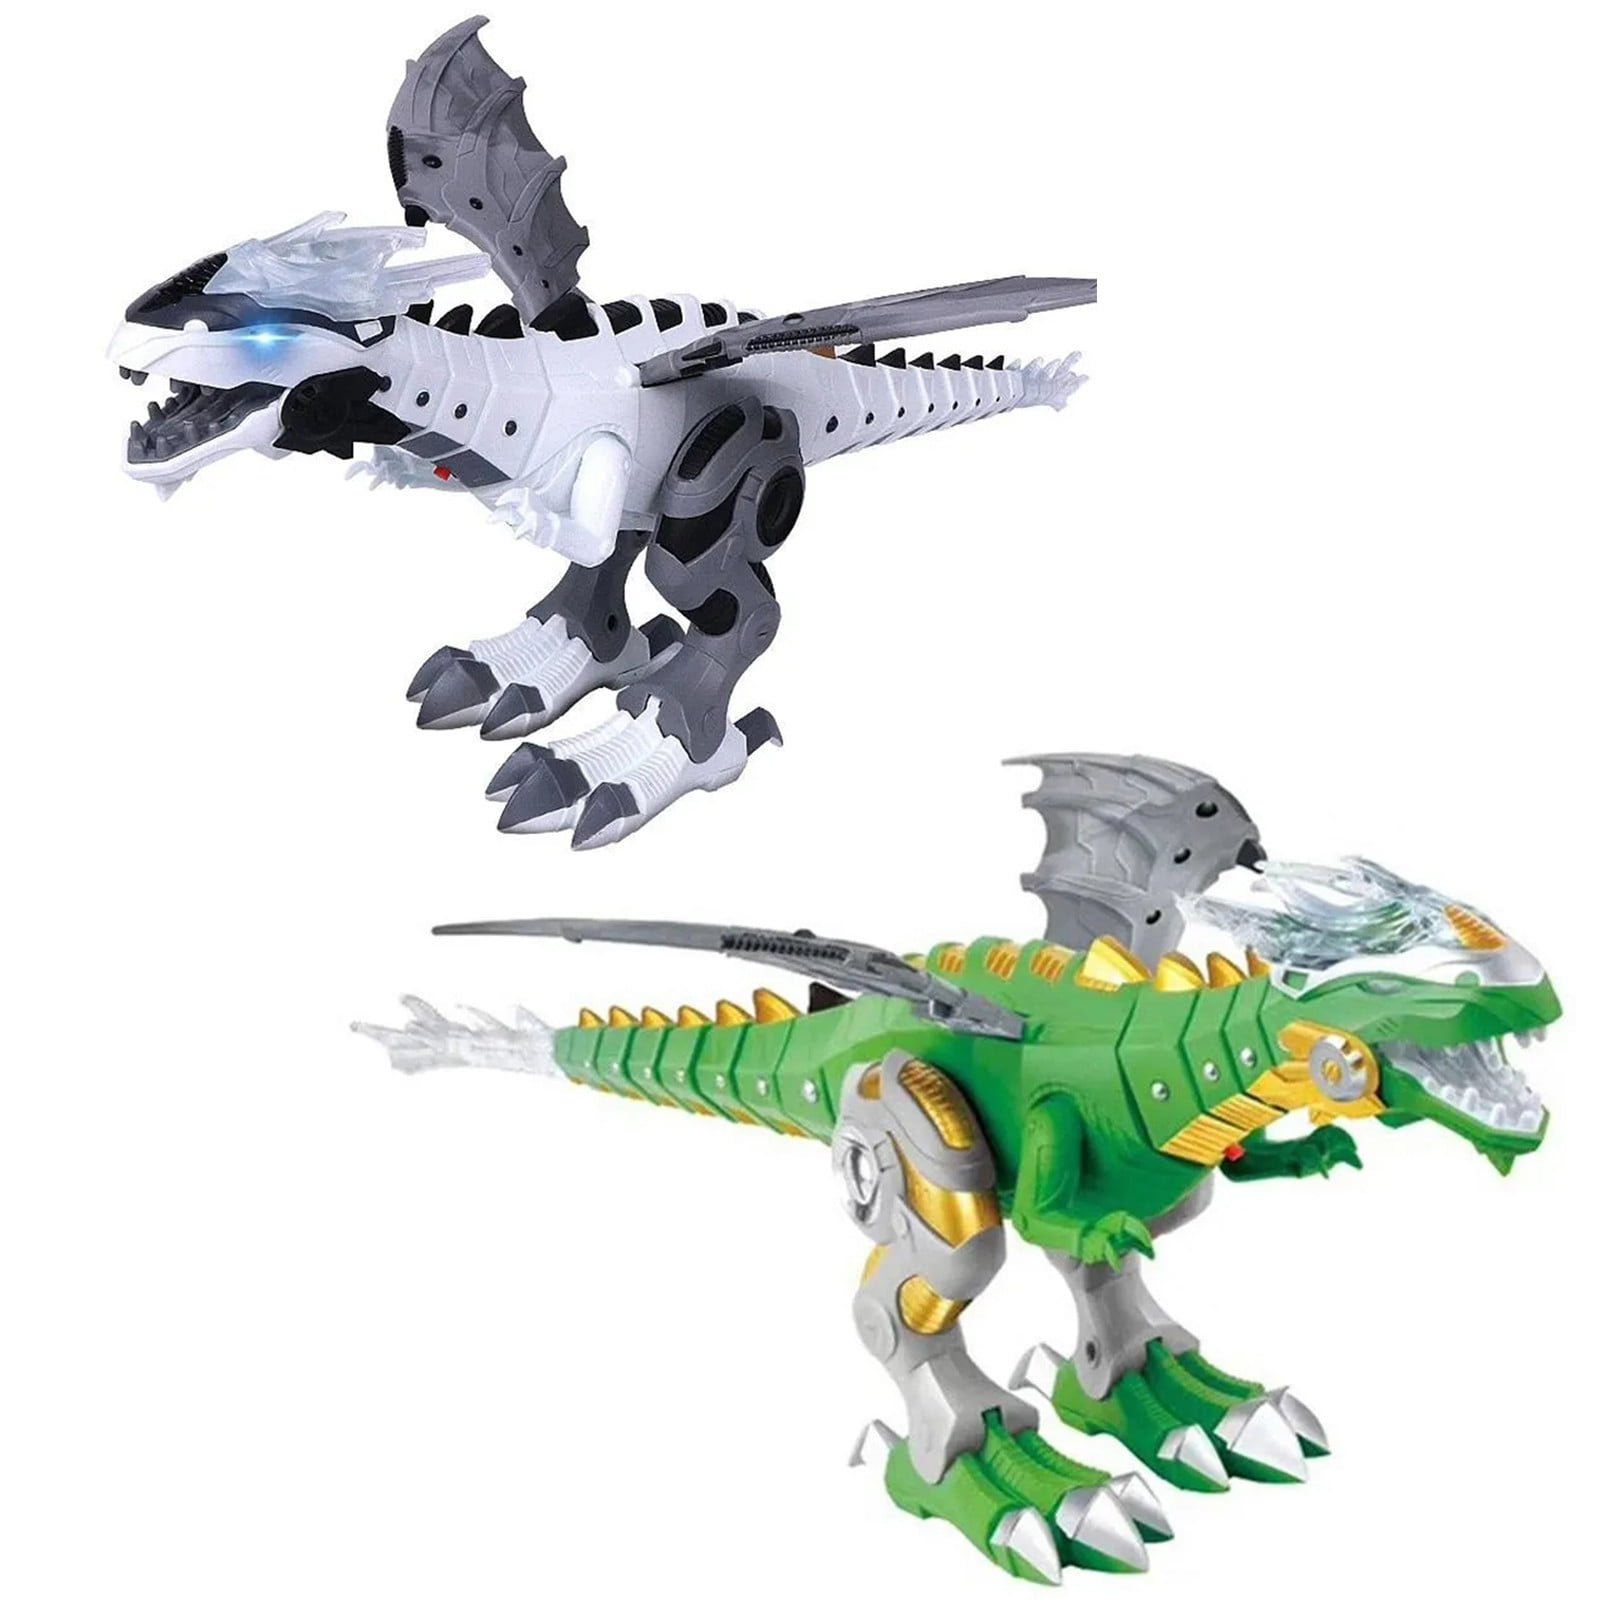 Walking Dragon Toy Fire Breathing Water Spray Dinosaur Xmas Gift For Kids l0A US 